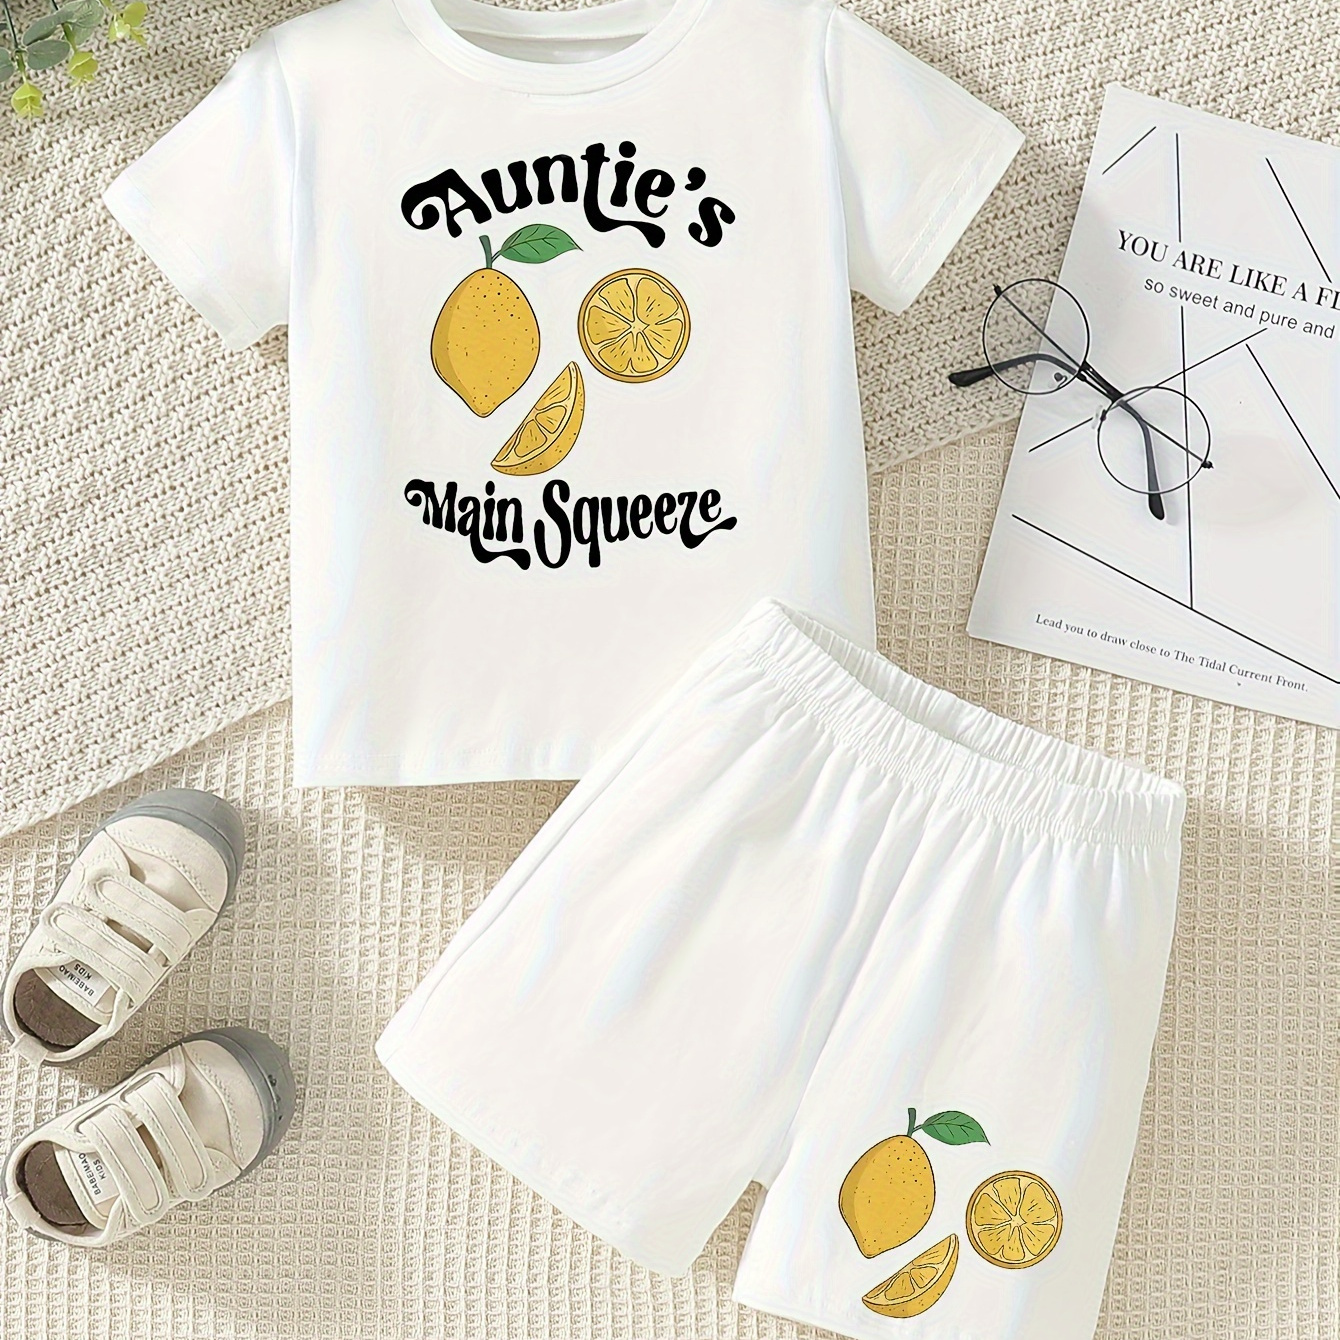 

Baby Boys 2-piece Cotton Outfit Set For Father's Day, Casual Sporty Comfort, Short Sleeve Round Neck T-shirt With Matching Shorts, Lemon Graphic "auntie's